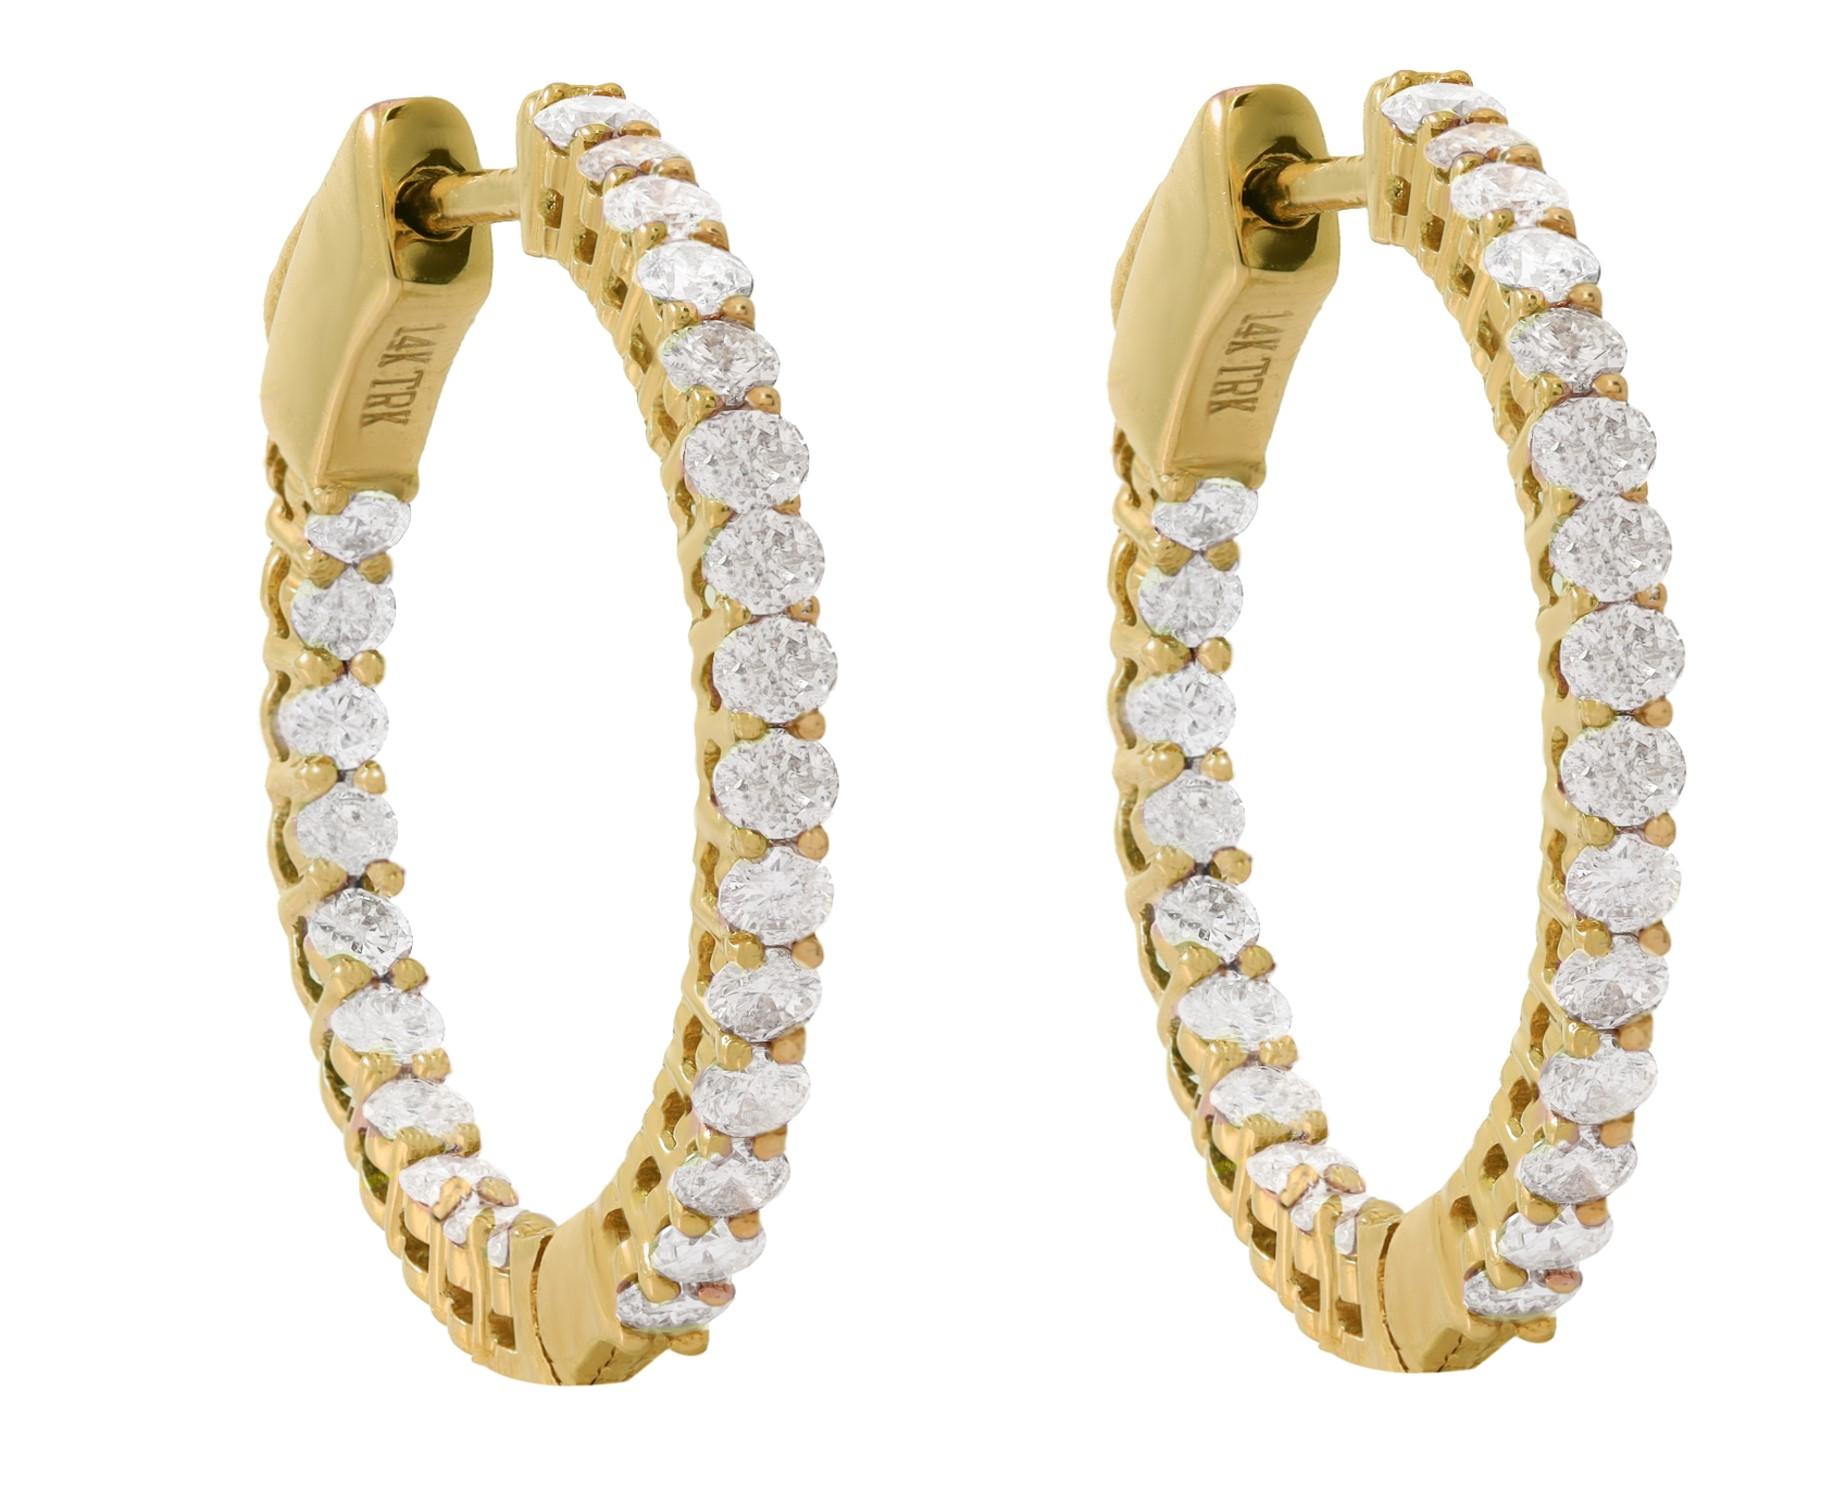 14K Yellow Gold Diamond Earrings featuring 1.00 Carats of Diamonds

Underline your look with this sharp 14K Yellow gold shape Diamond Earrings. High quality Diamonds. This Earrings will underline your exquisite look for any occasion.

. is a leading